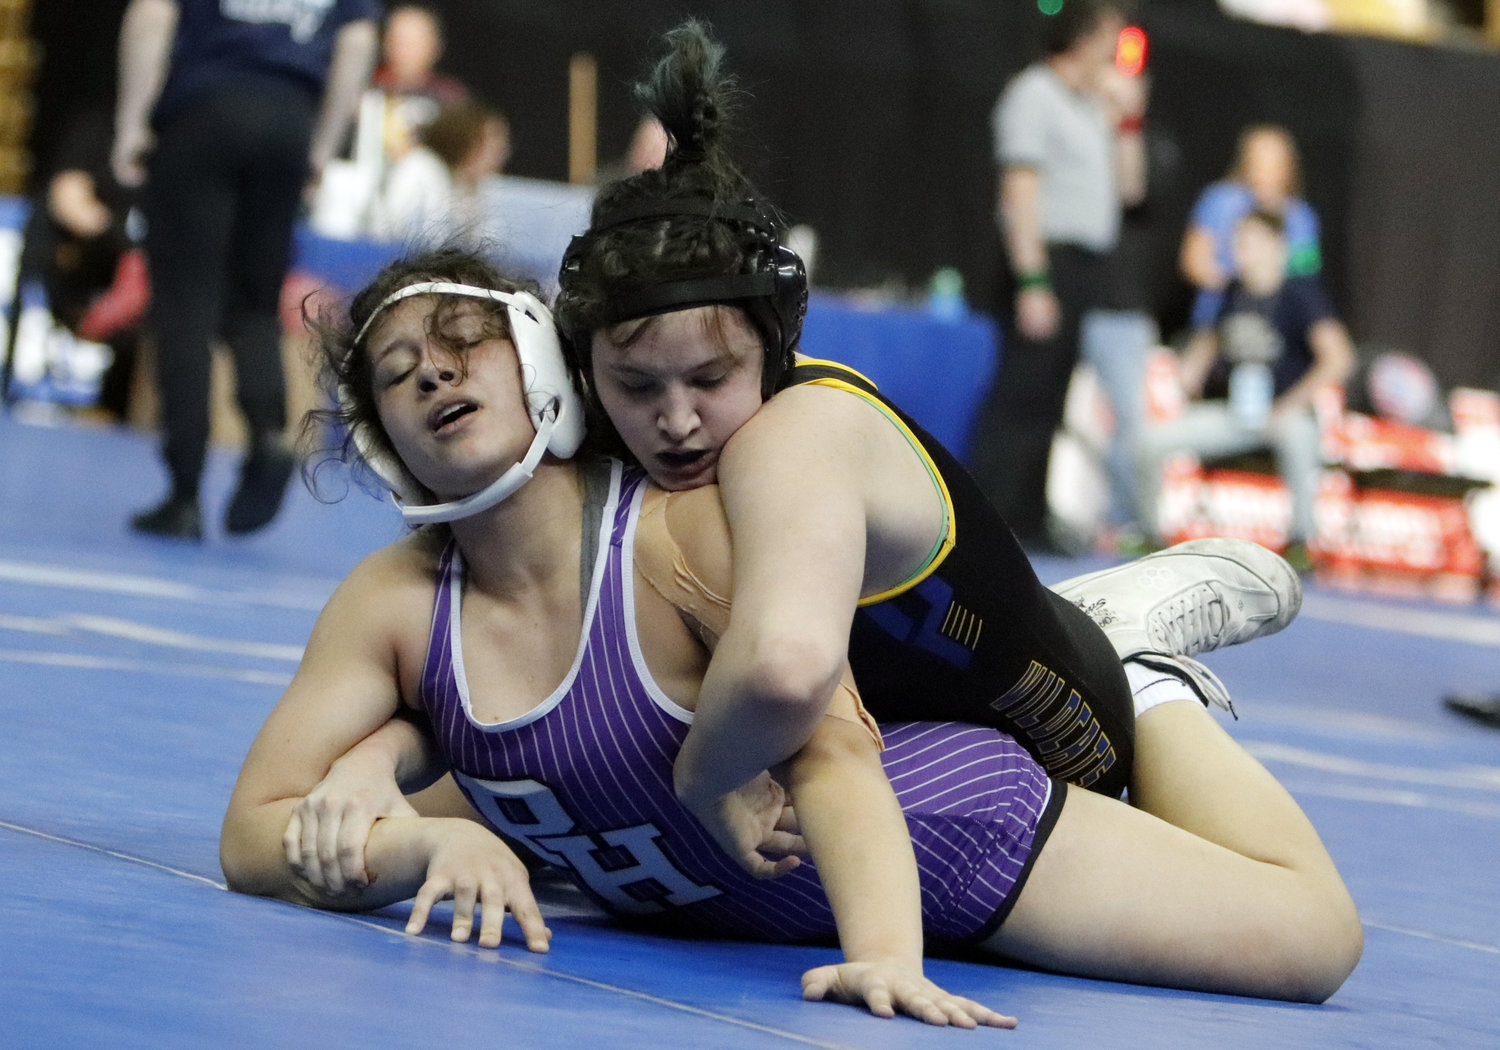 Caelyn Hanff (top) reaches for the arm of Pleasant Hill wrestler Alana Thielen during the third place match in the 170-pound weight class.